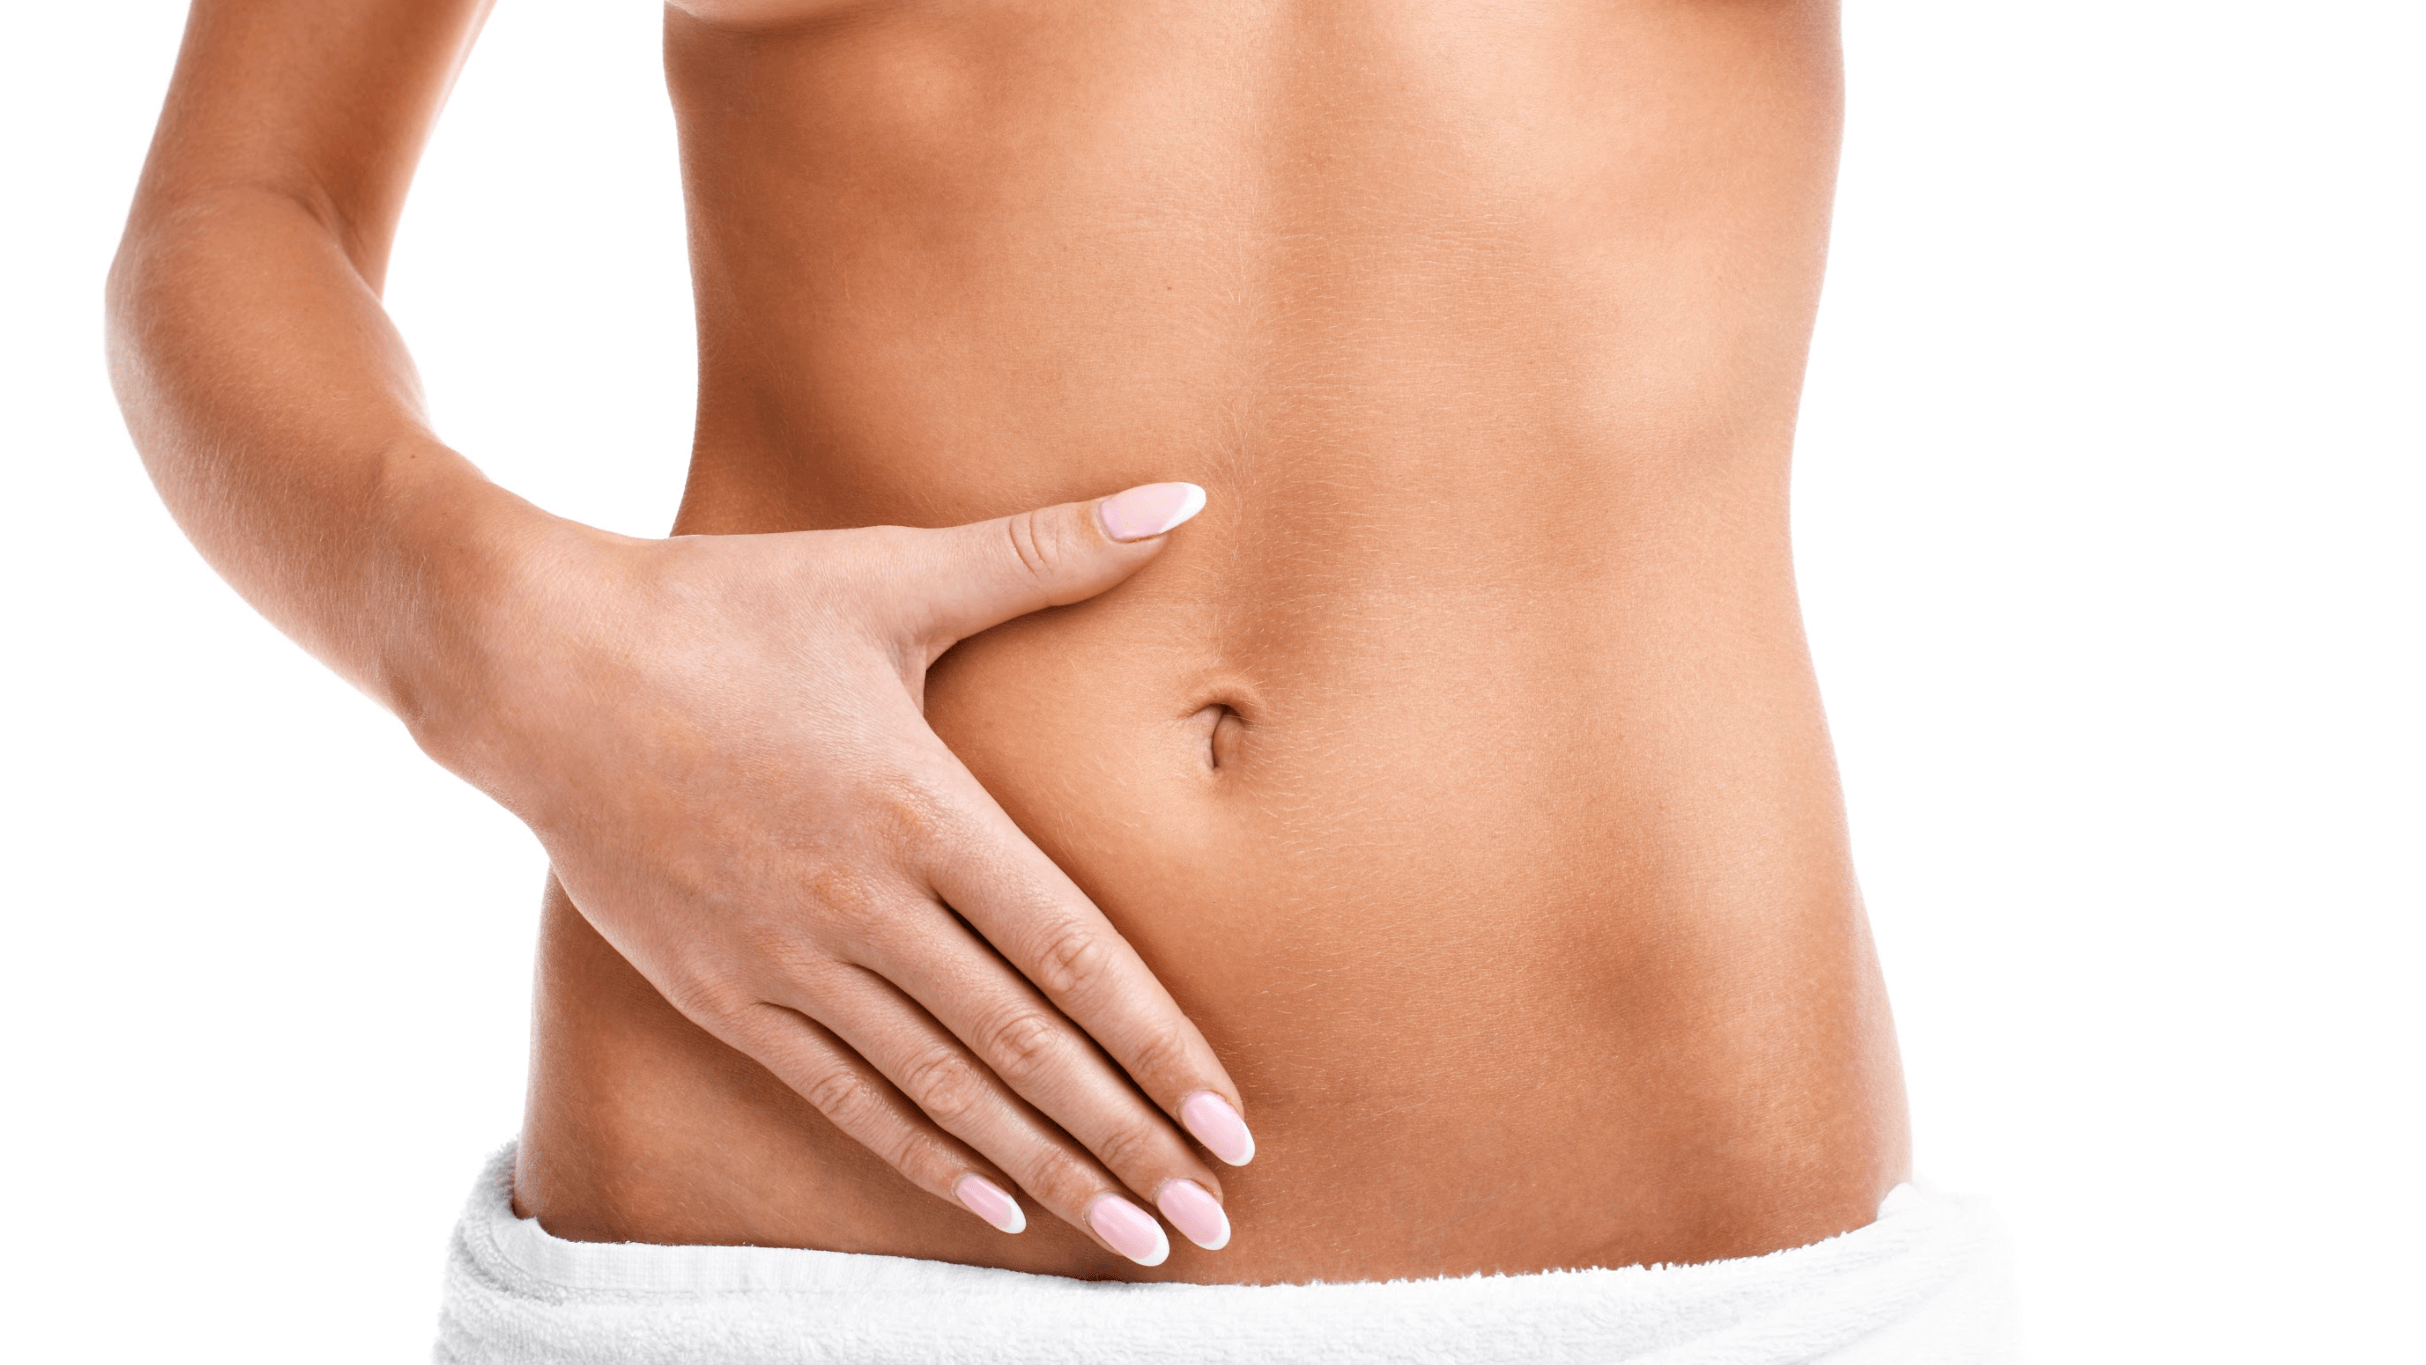 How Much Abdomen Fat Can be Reduced With CoolSculpting® Treatment?